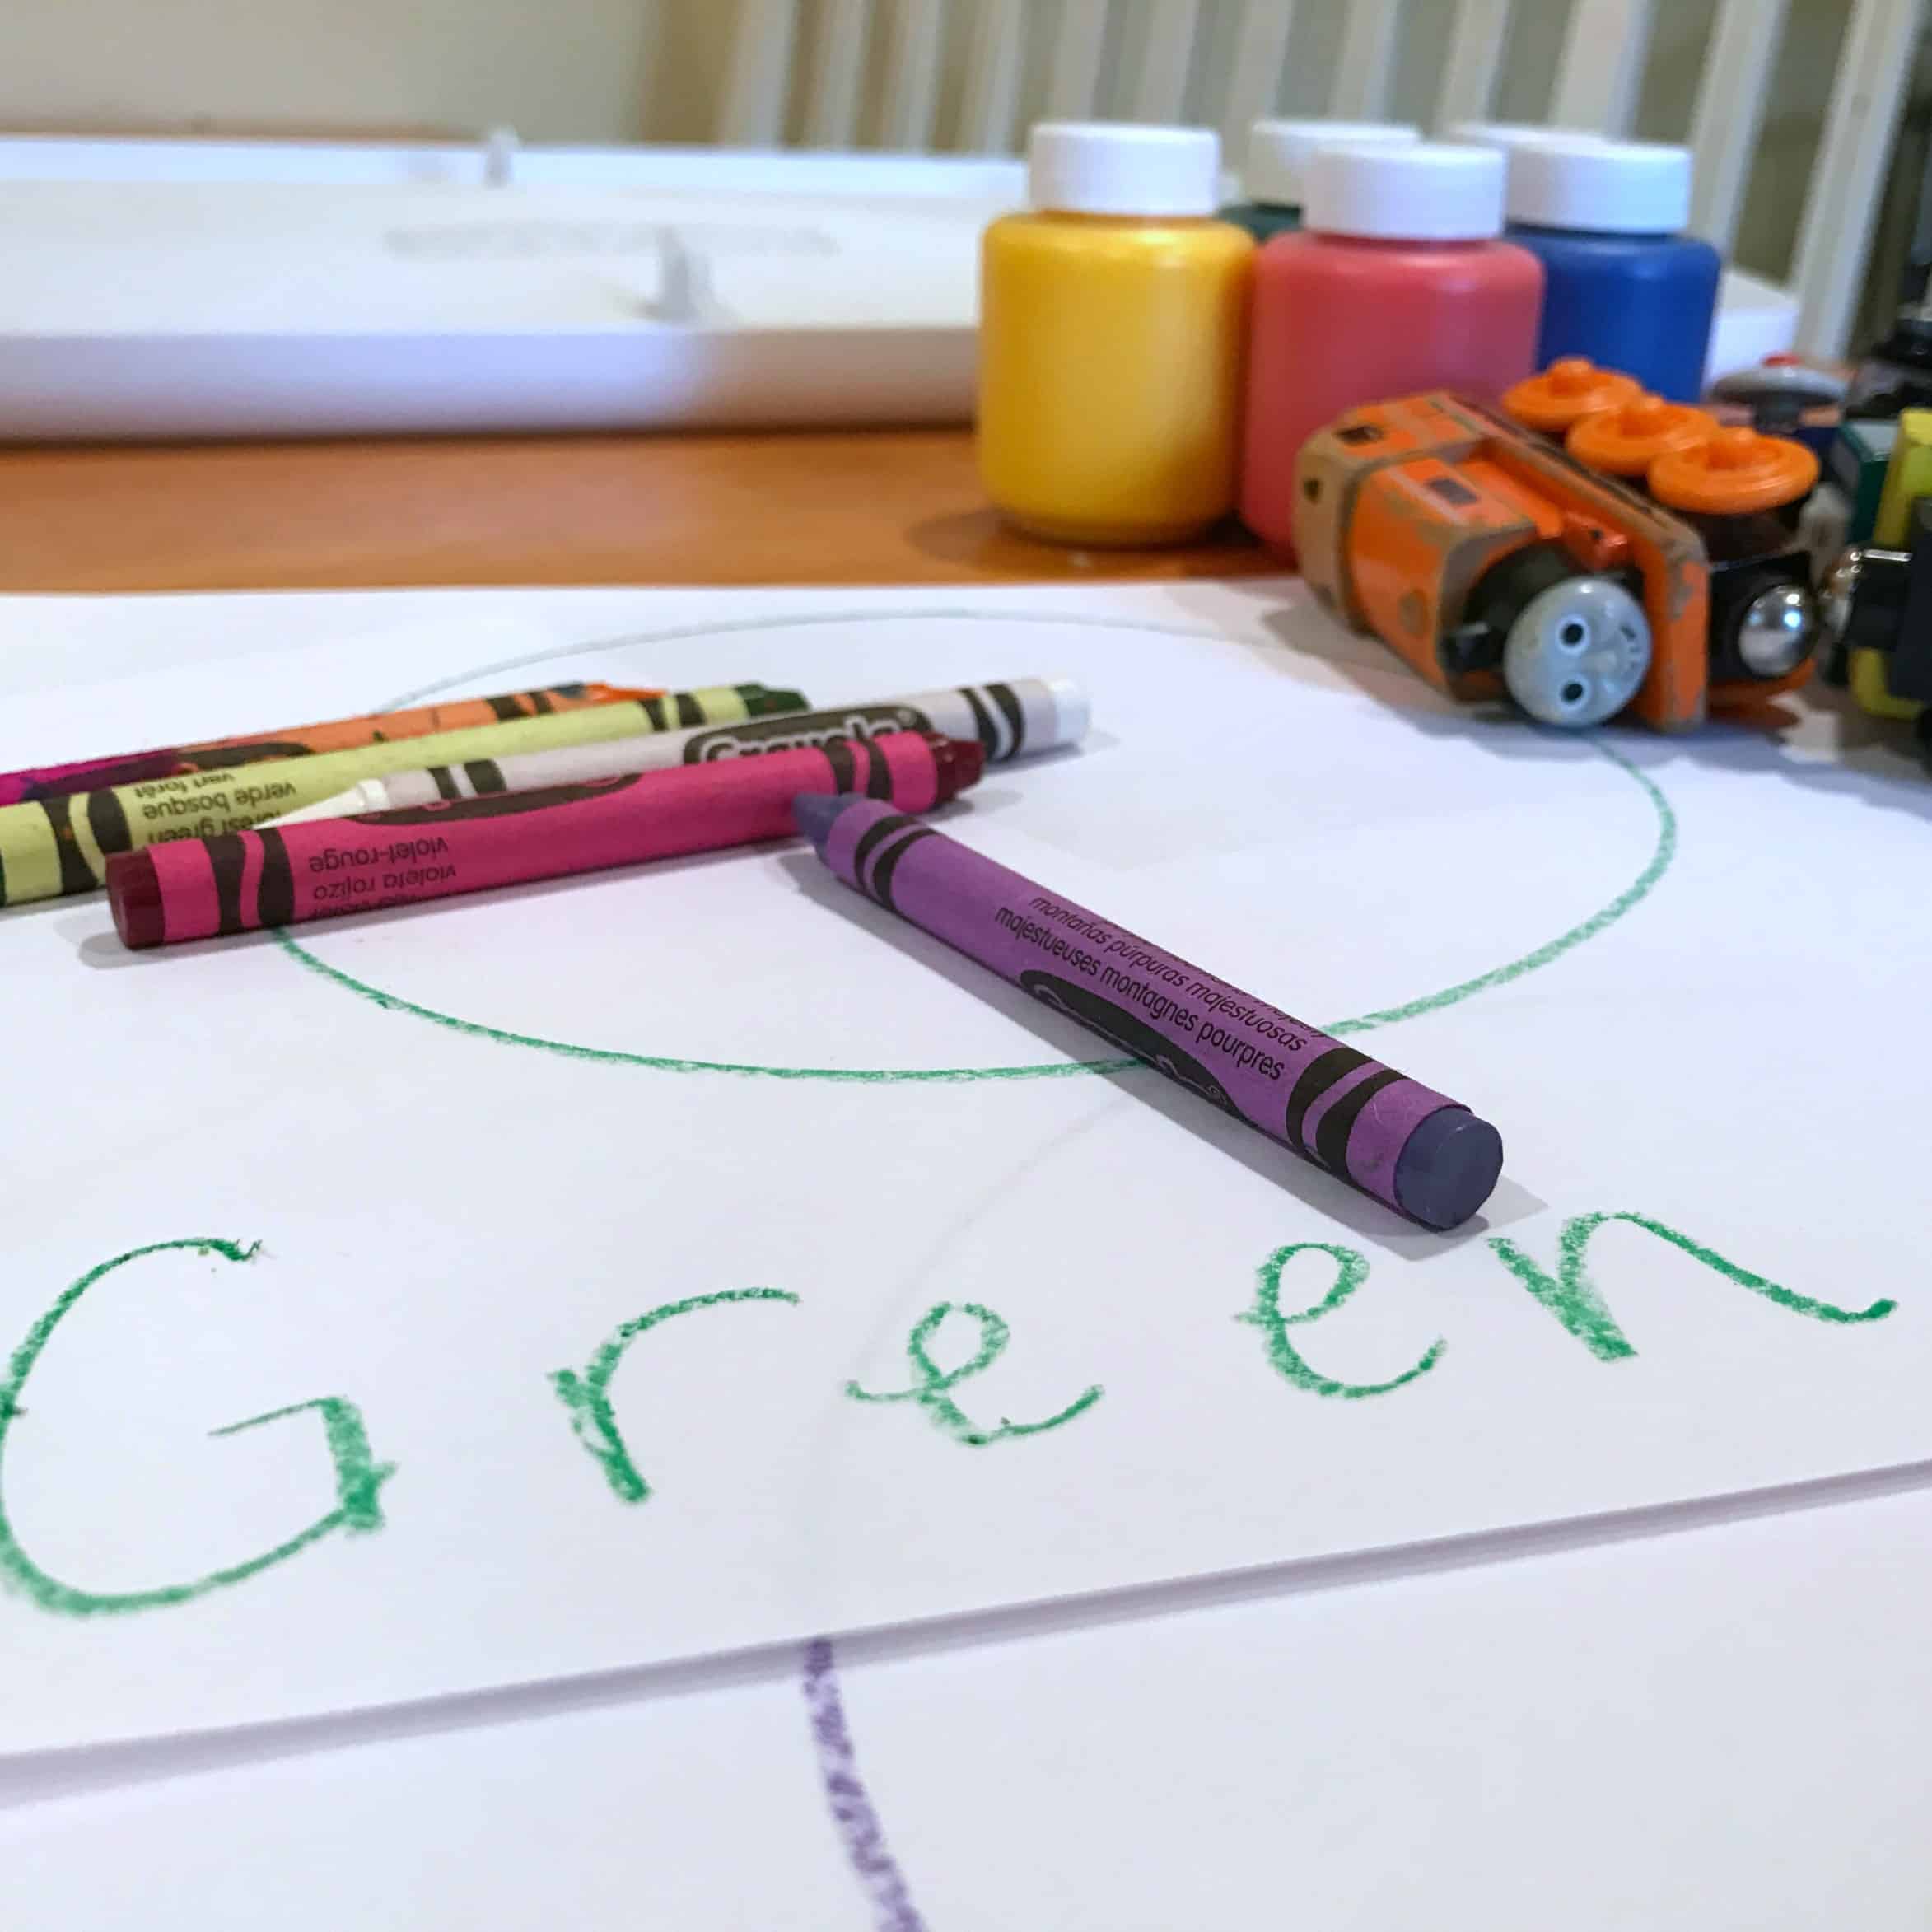 Painting with trains is a really great way to create a hands-on experience while learning colors! This fun method combines art with learning for toddlers.